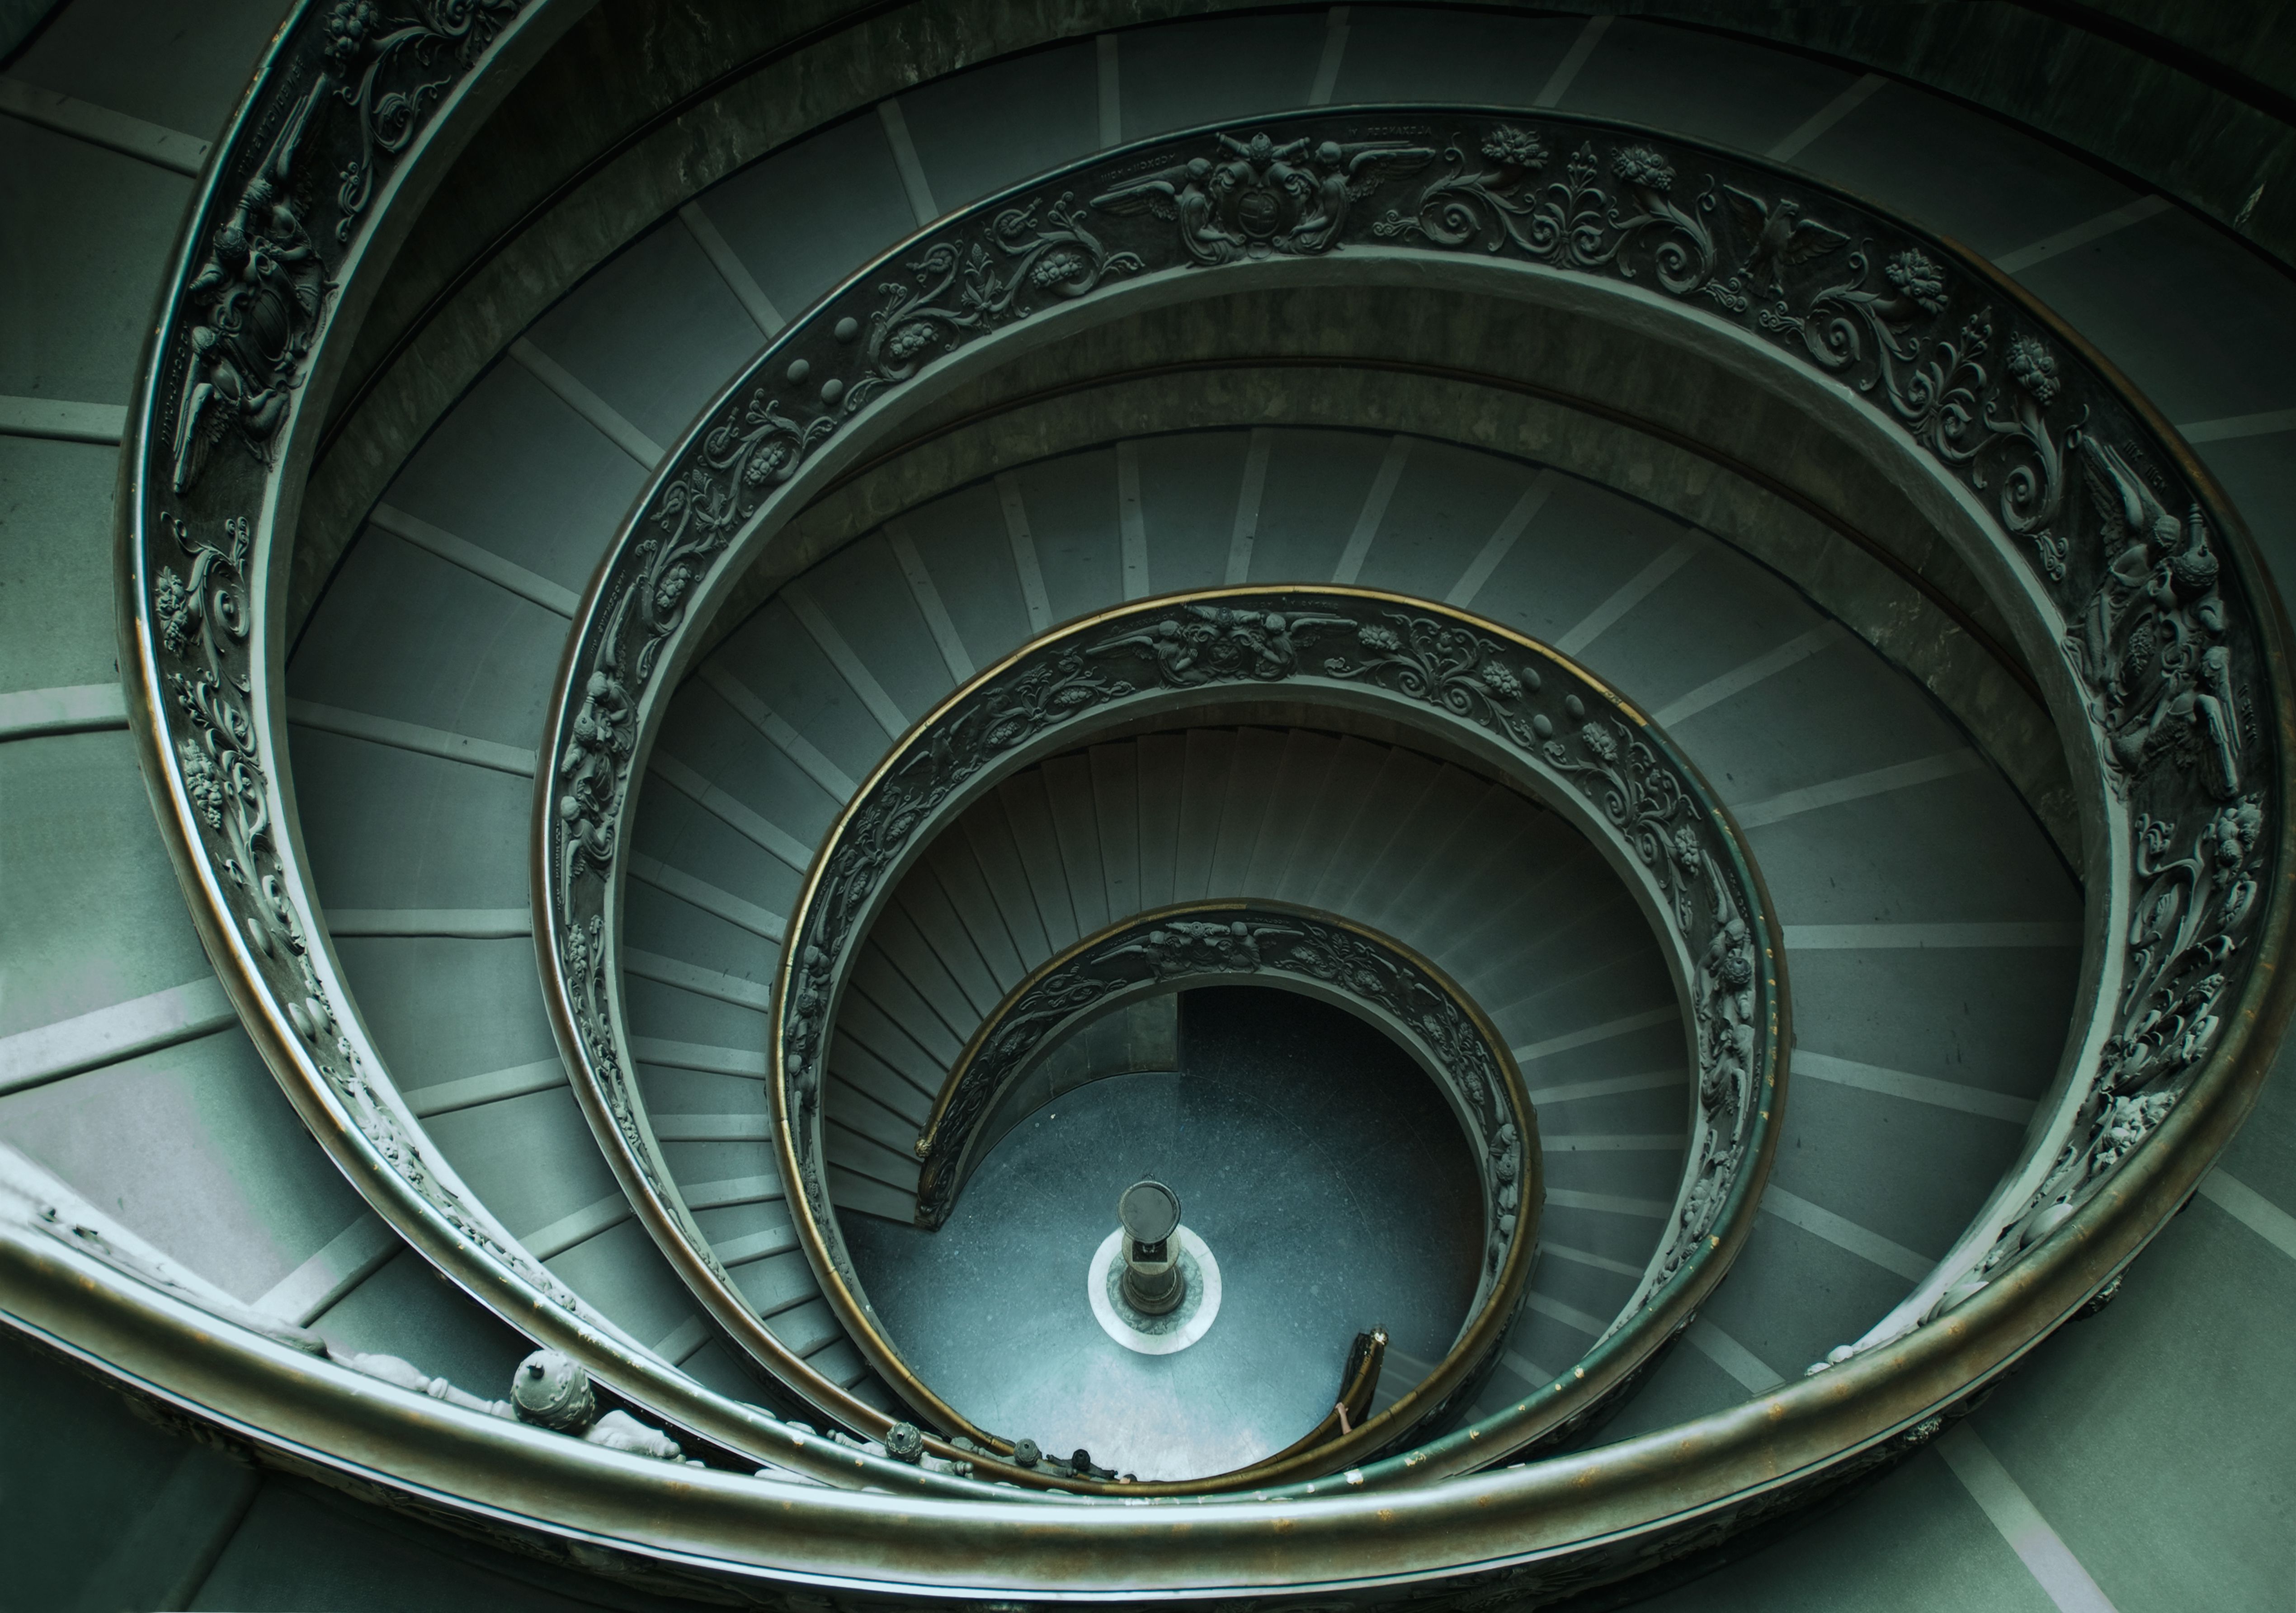 Downward view of spiral staircase